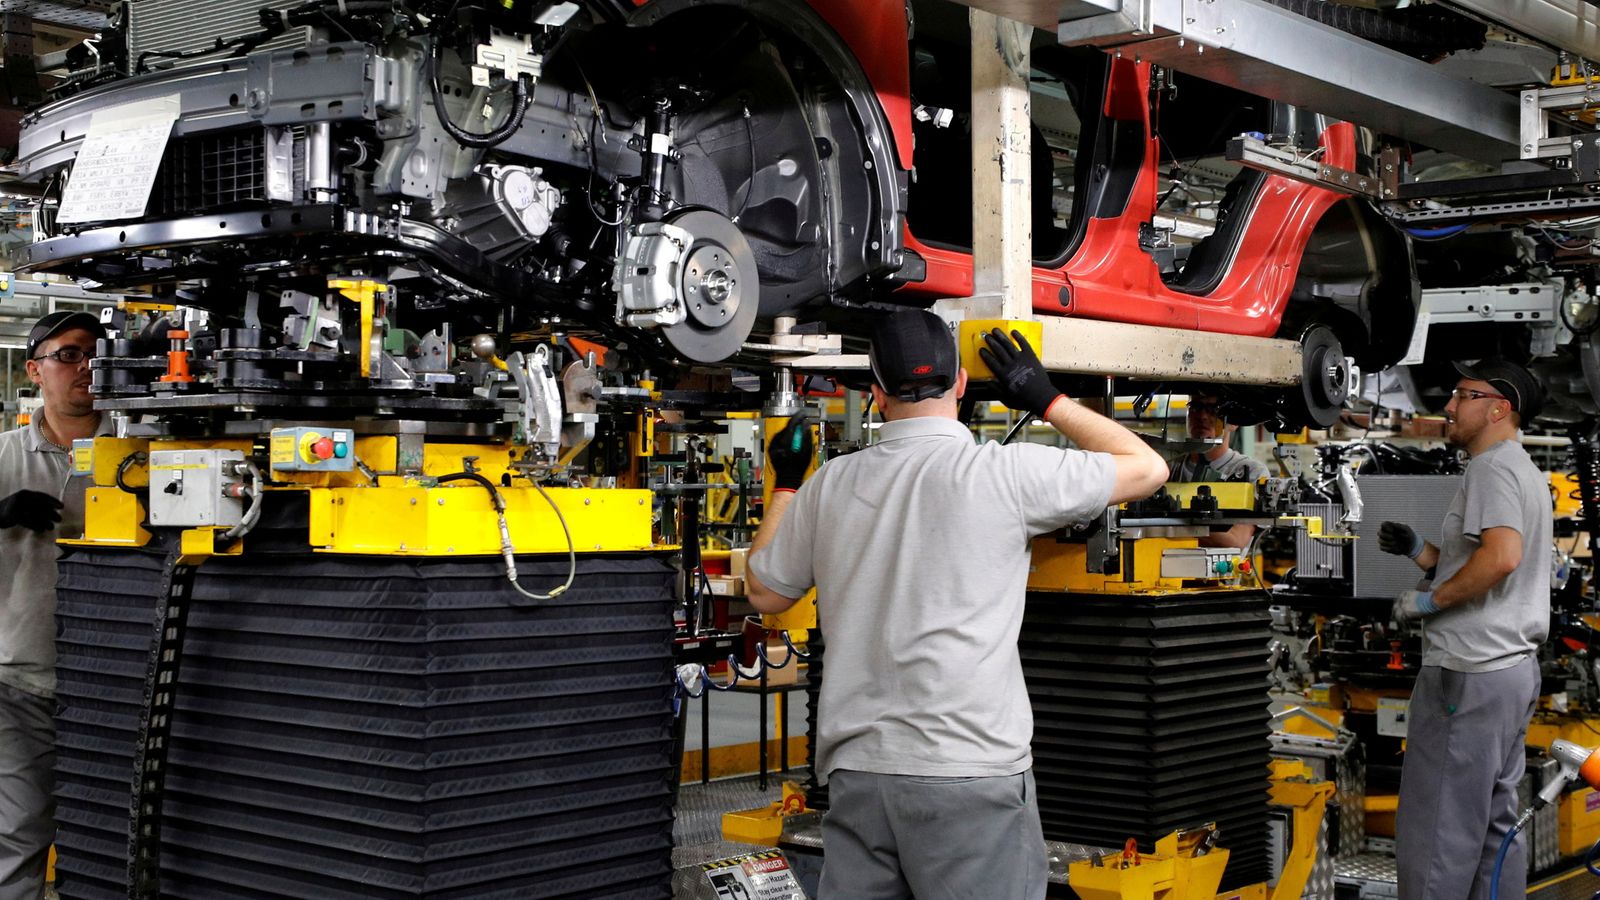 'Worst October since 1956': Global COVID woes apply brakes to UK car production